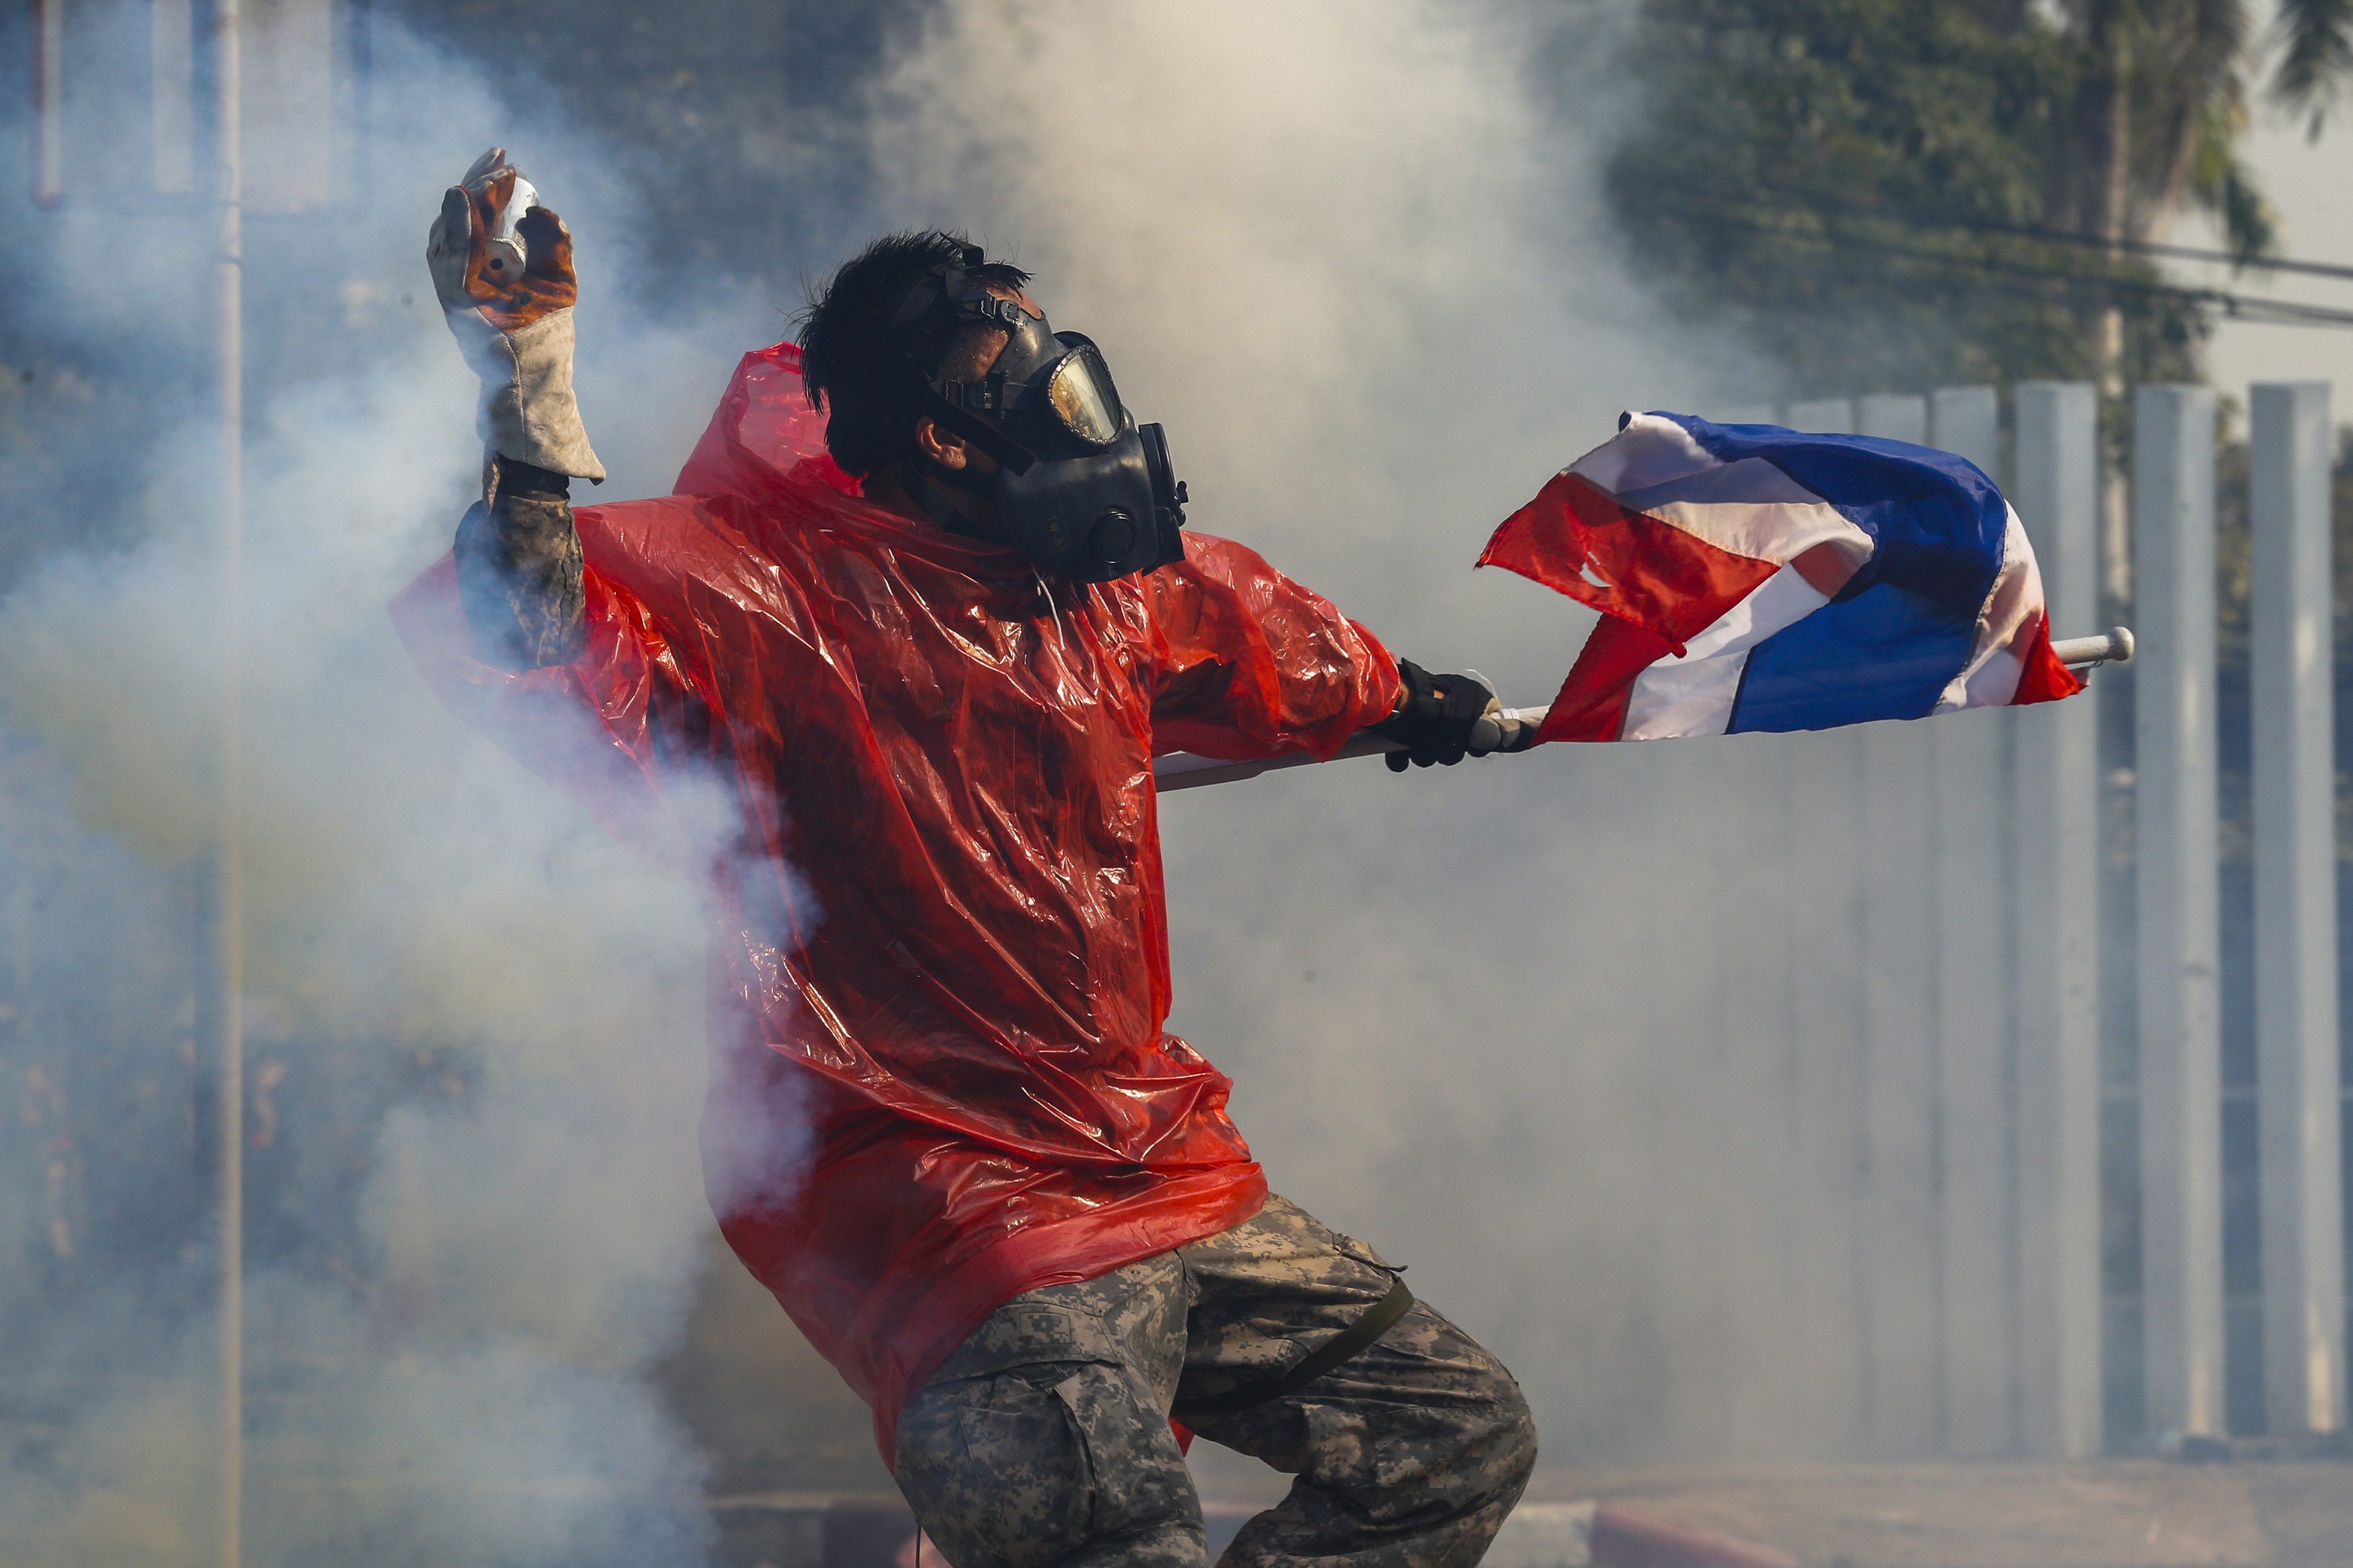 Anti-government protesters throw rocks and tear gas canisters at police in Bangkok as protests take a violent turn ahead of February's election. Photo: Reuters